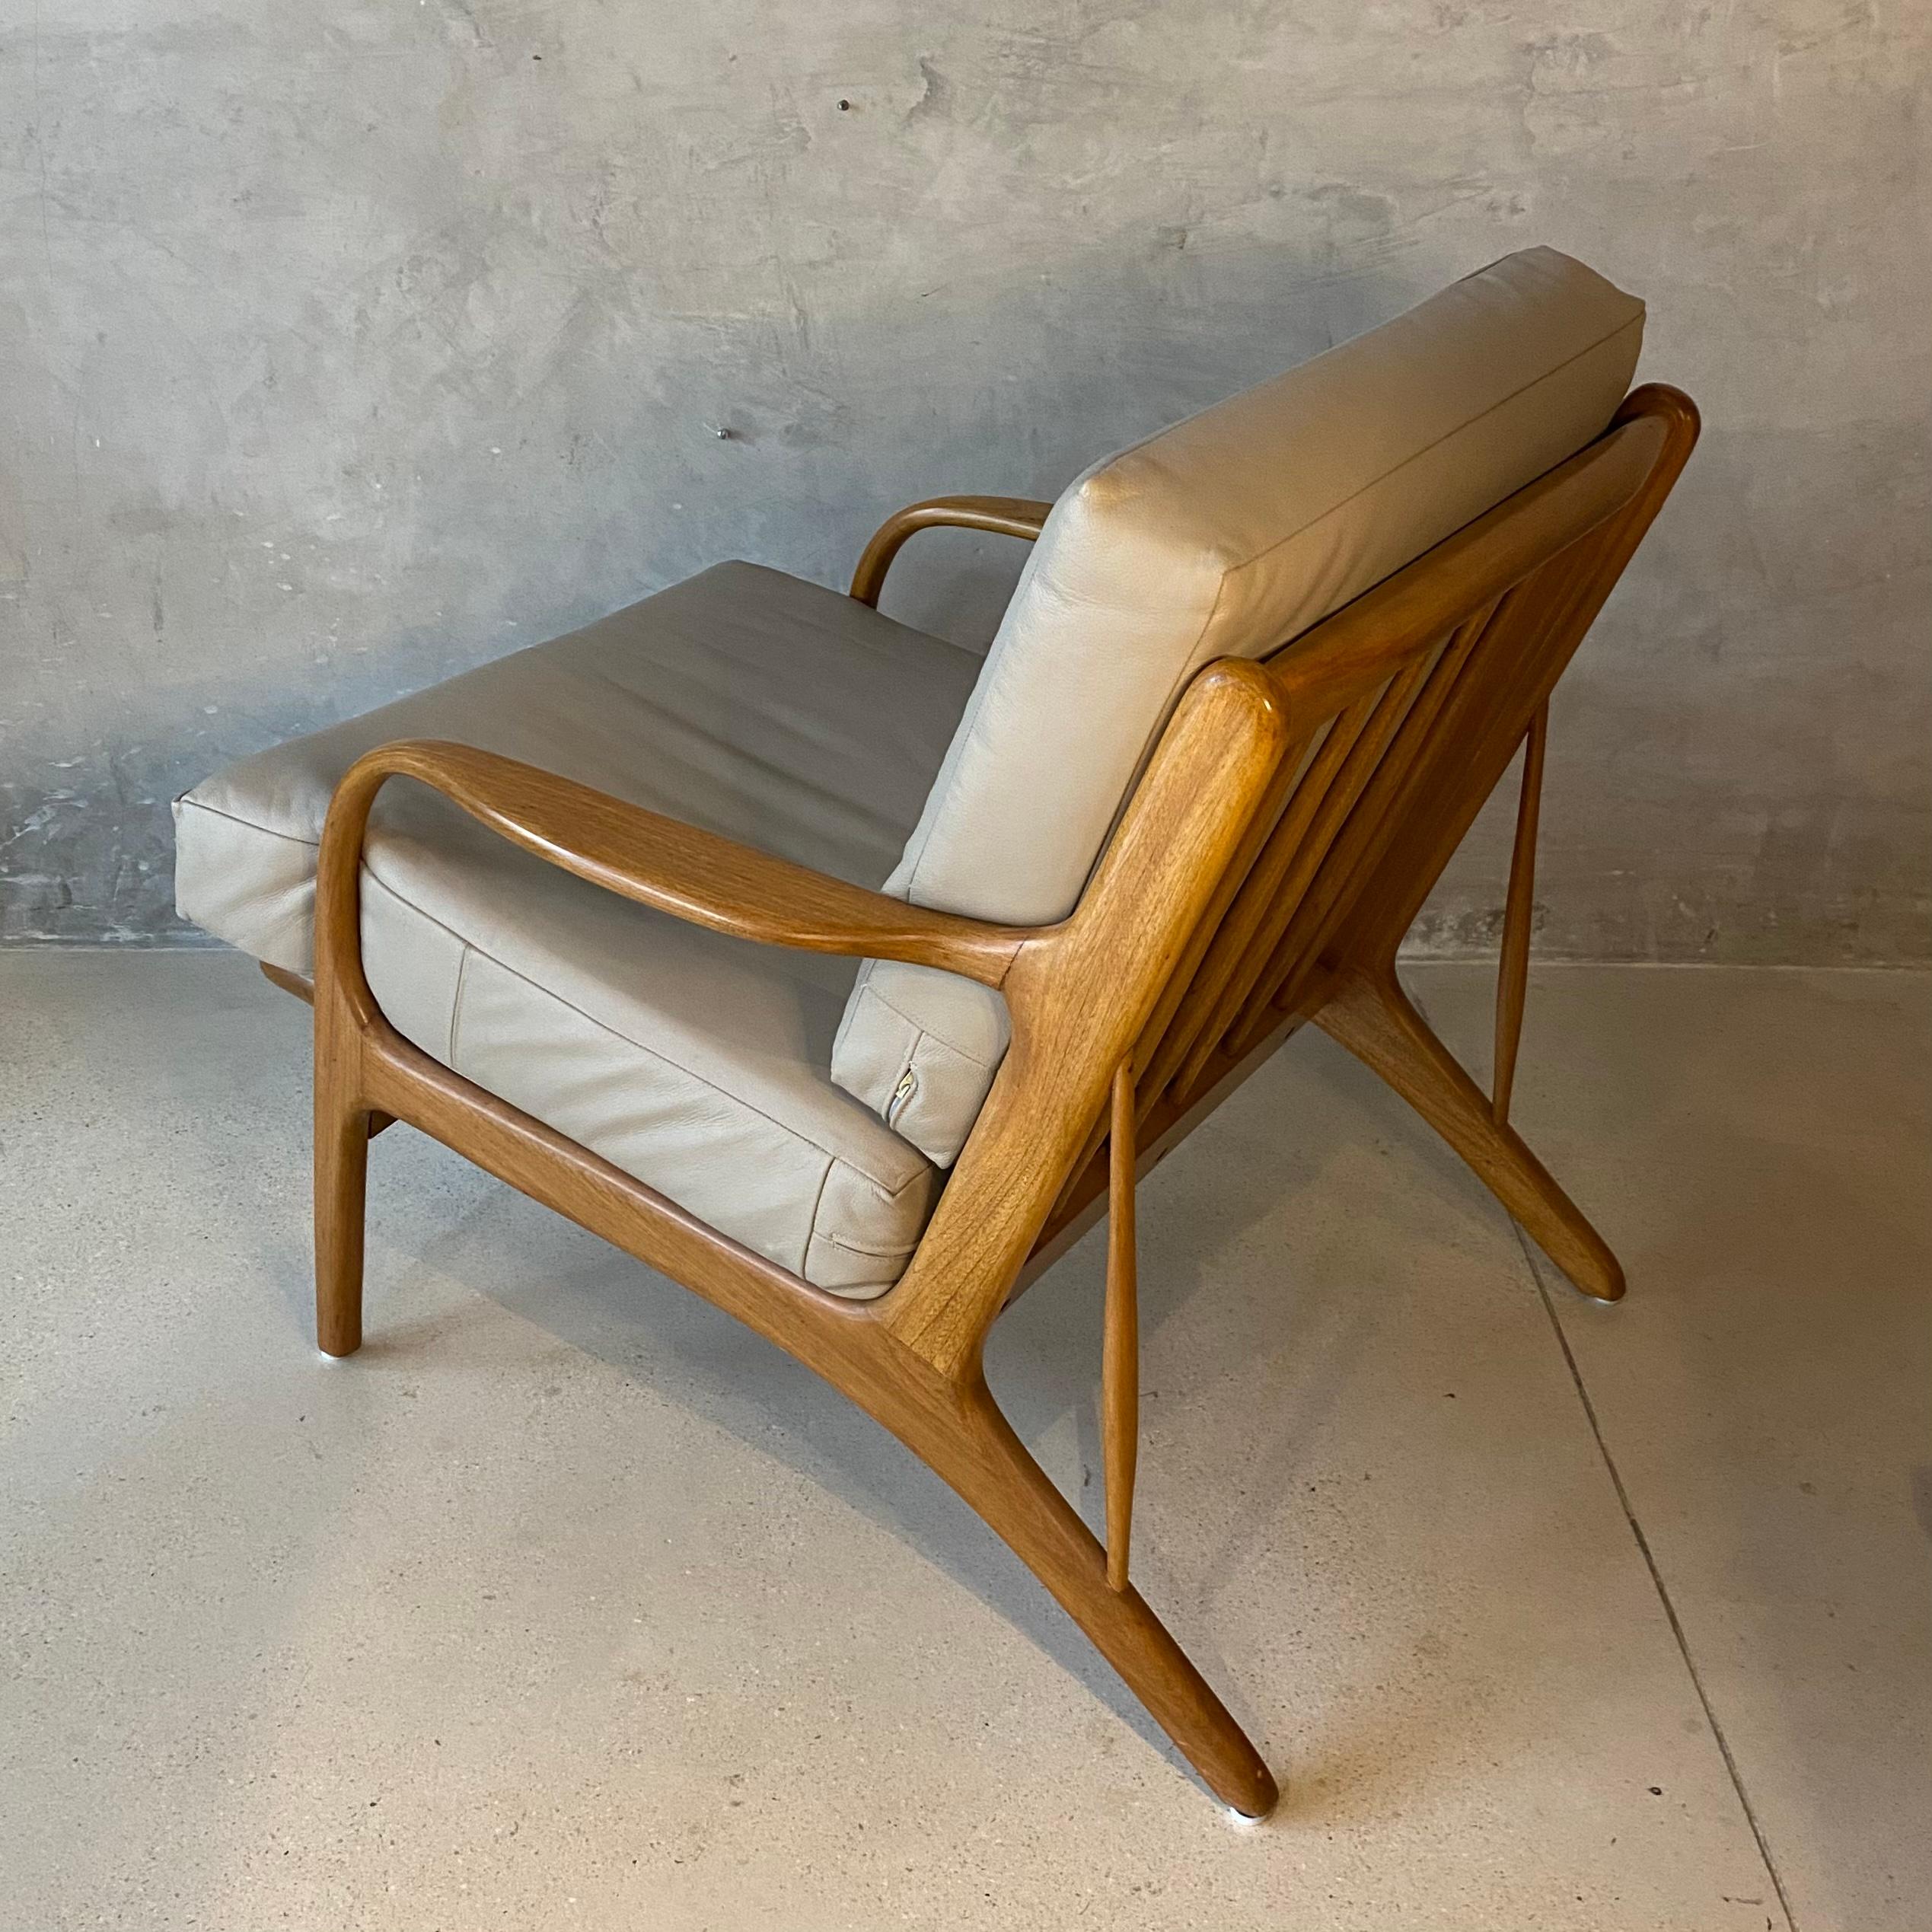 Mexican Midcentury Lounge Chair, “Malinche“, 1950s For Sale 6